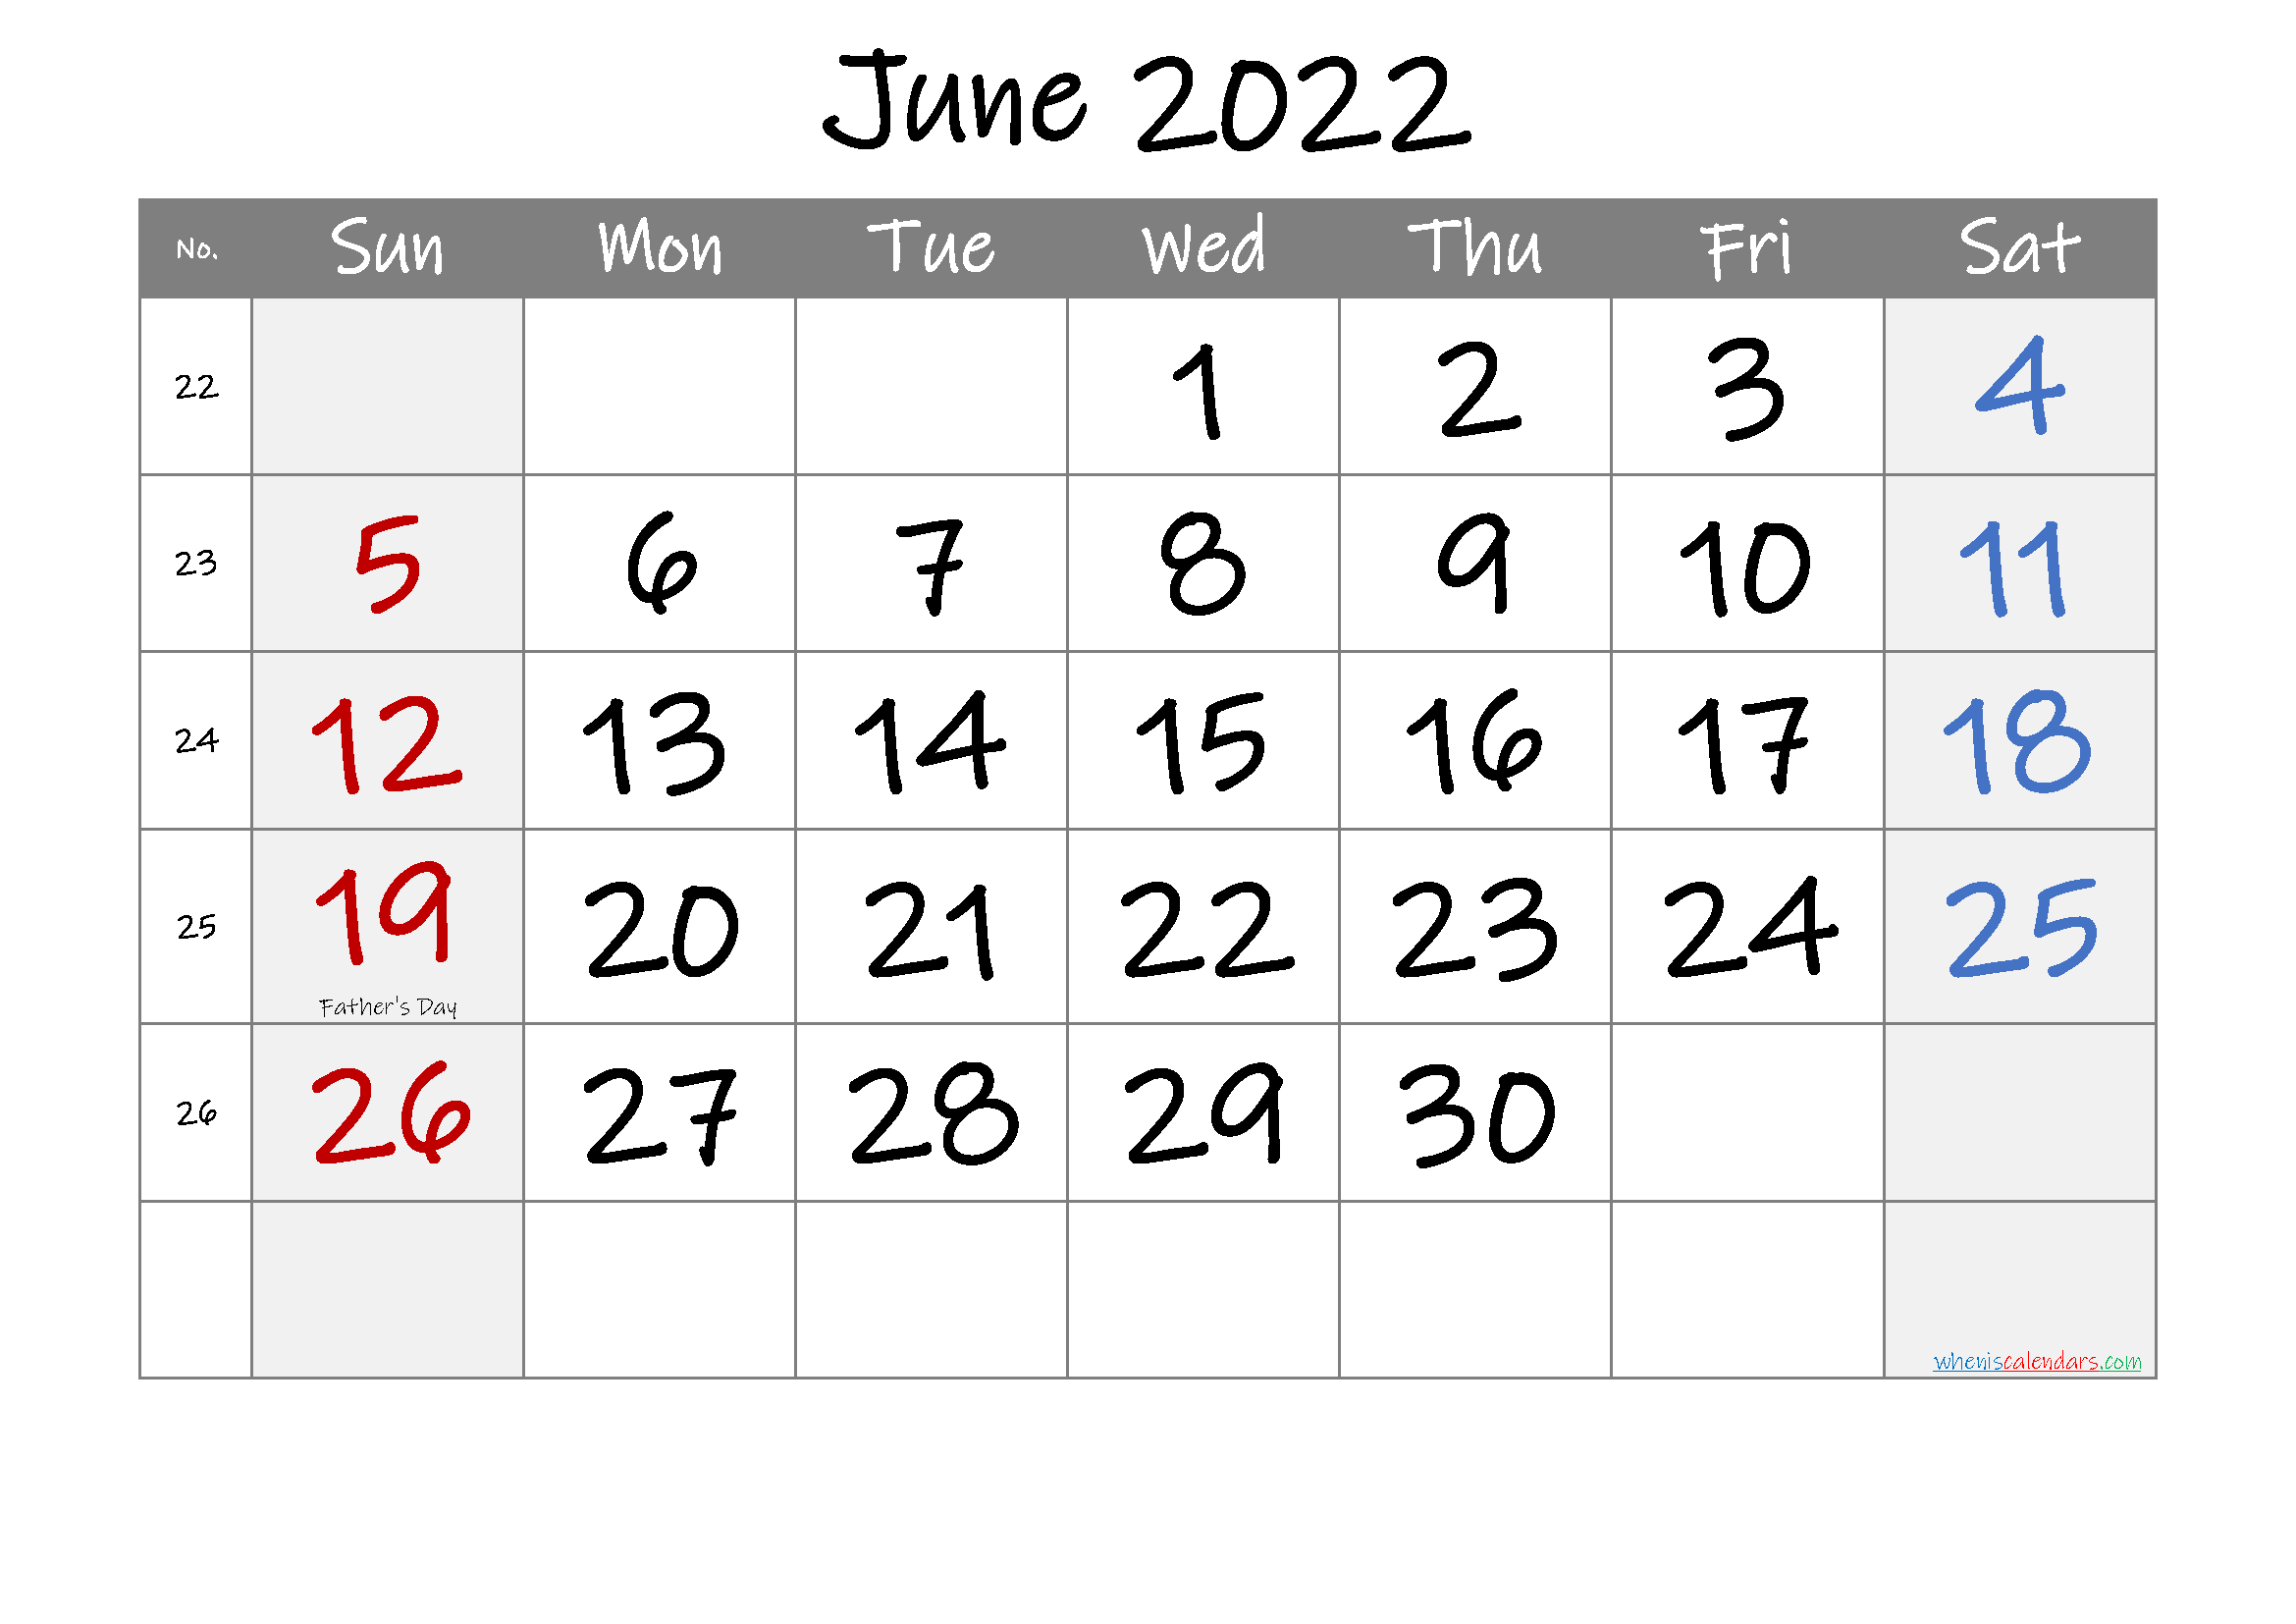 June 2022 Free Printable Calendar With HolidaysTemplate No.if22m18